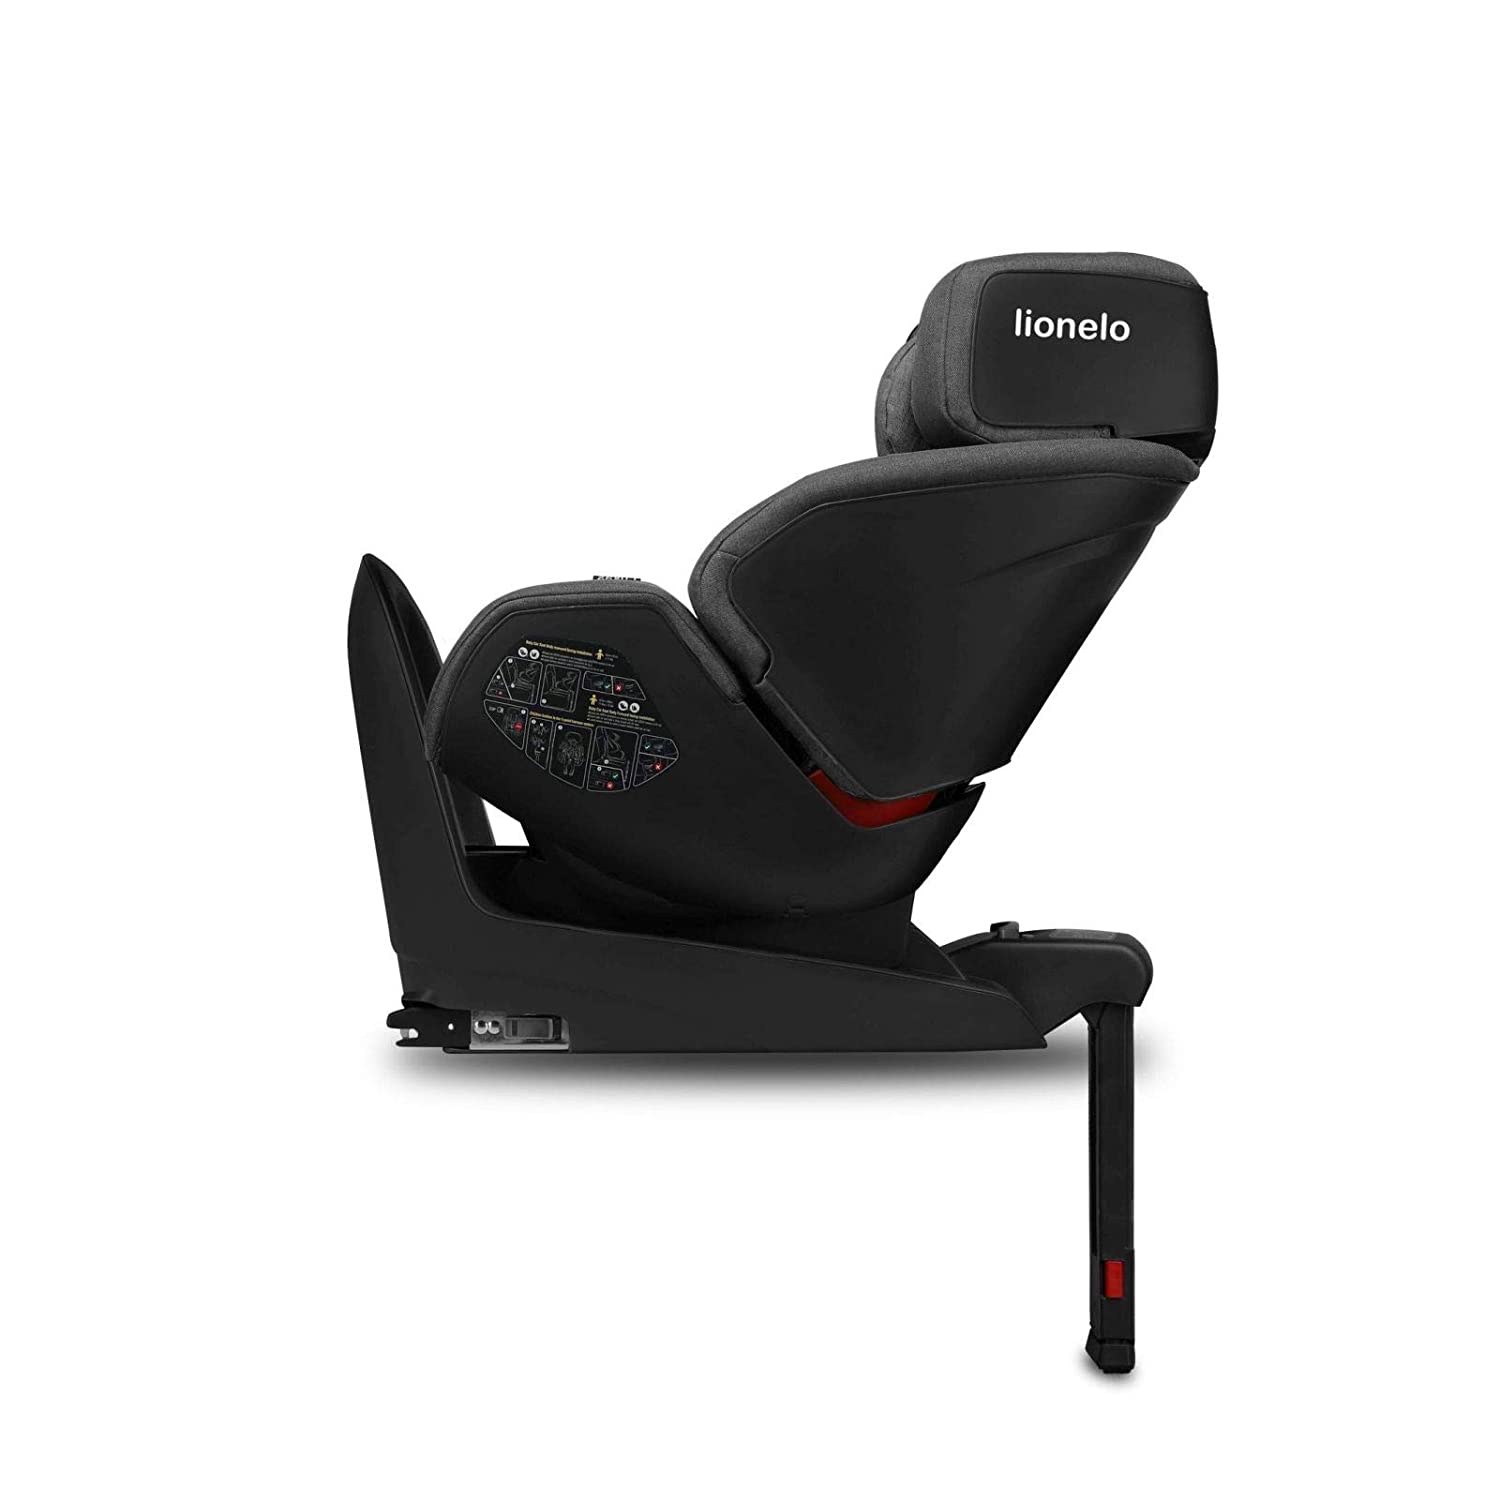 Lionelo Lukas Safety Car Seat 0-18 kg Forwards and Backwards ISOFIX + Support Leg Carbon